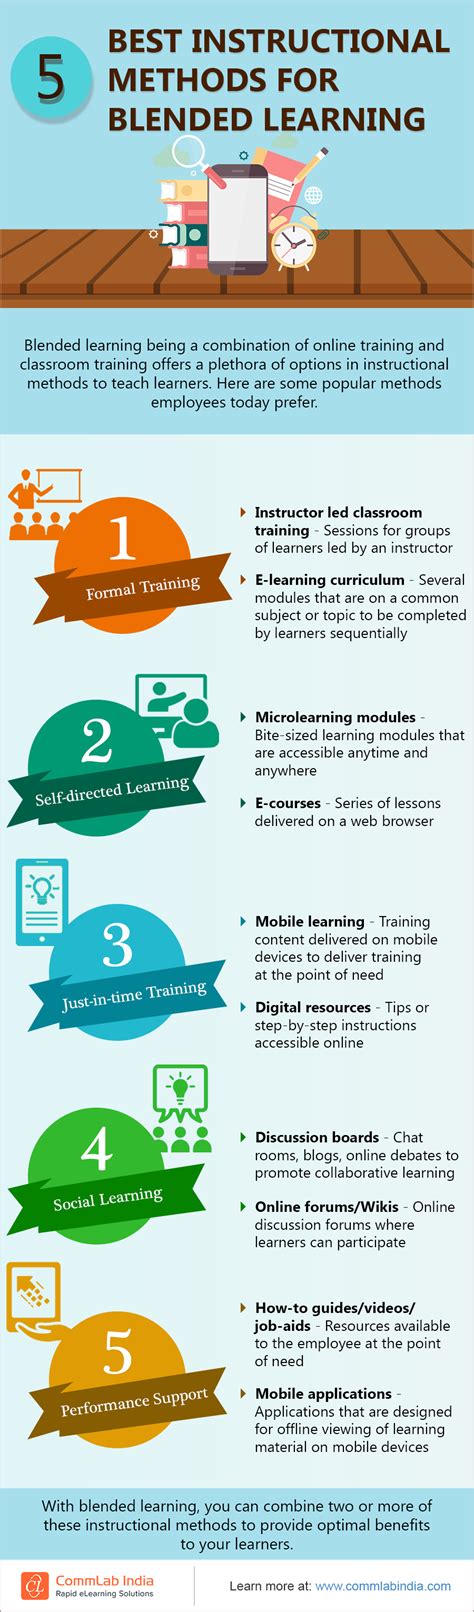 This Infographic Lists Some Of The Instructional Methods You Can Use